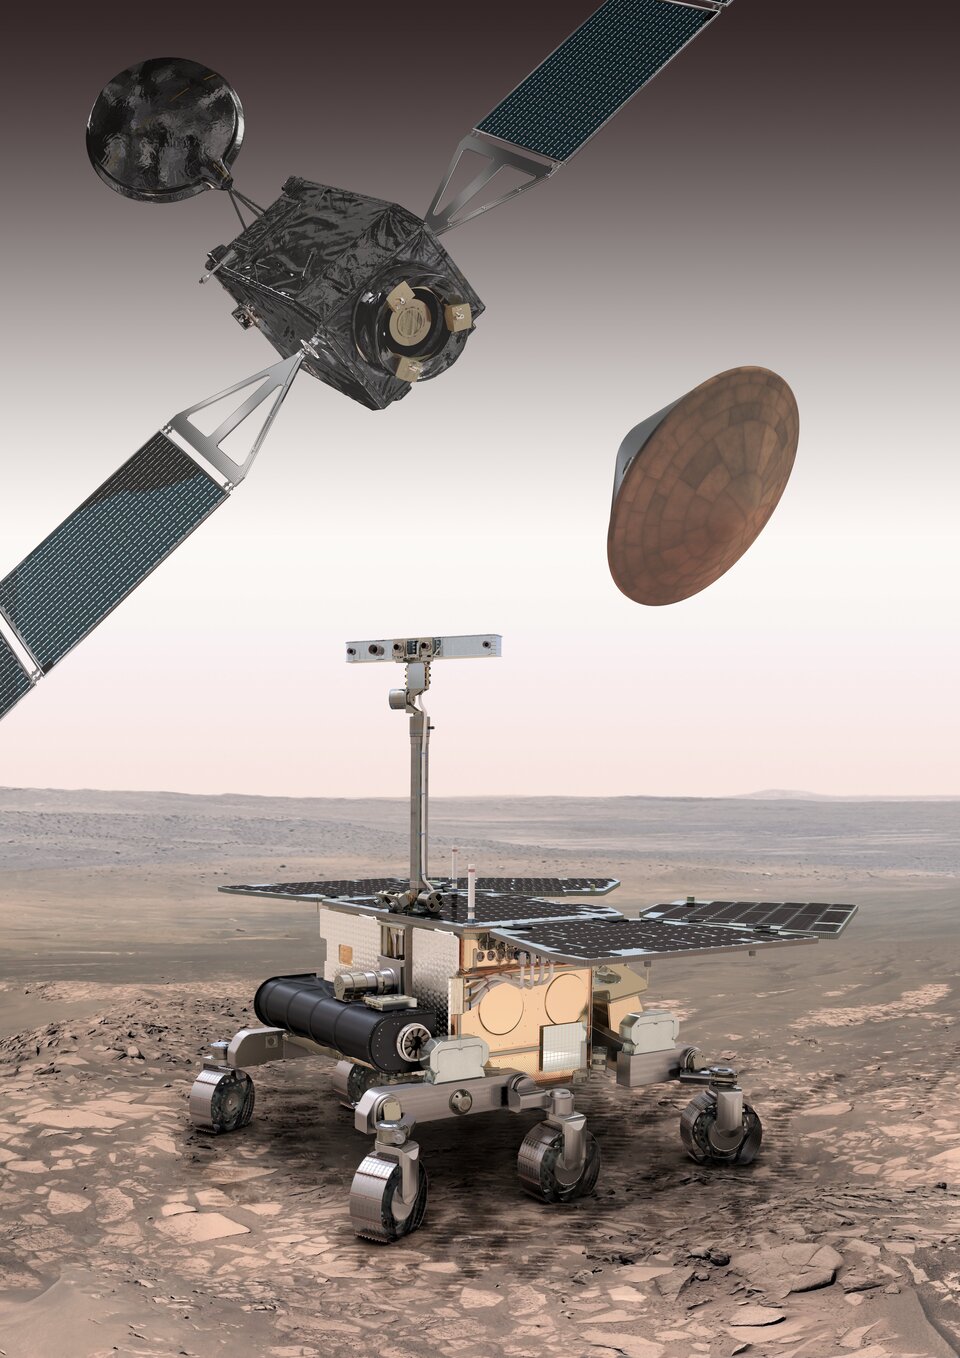 ExoMars 2016 and 2018